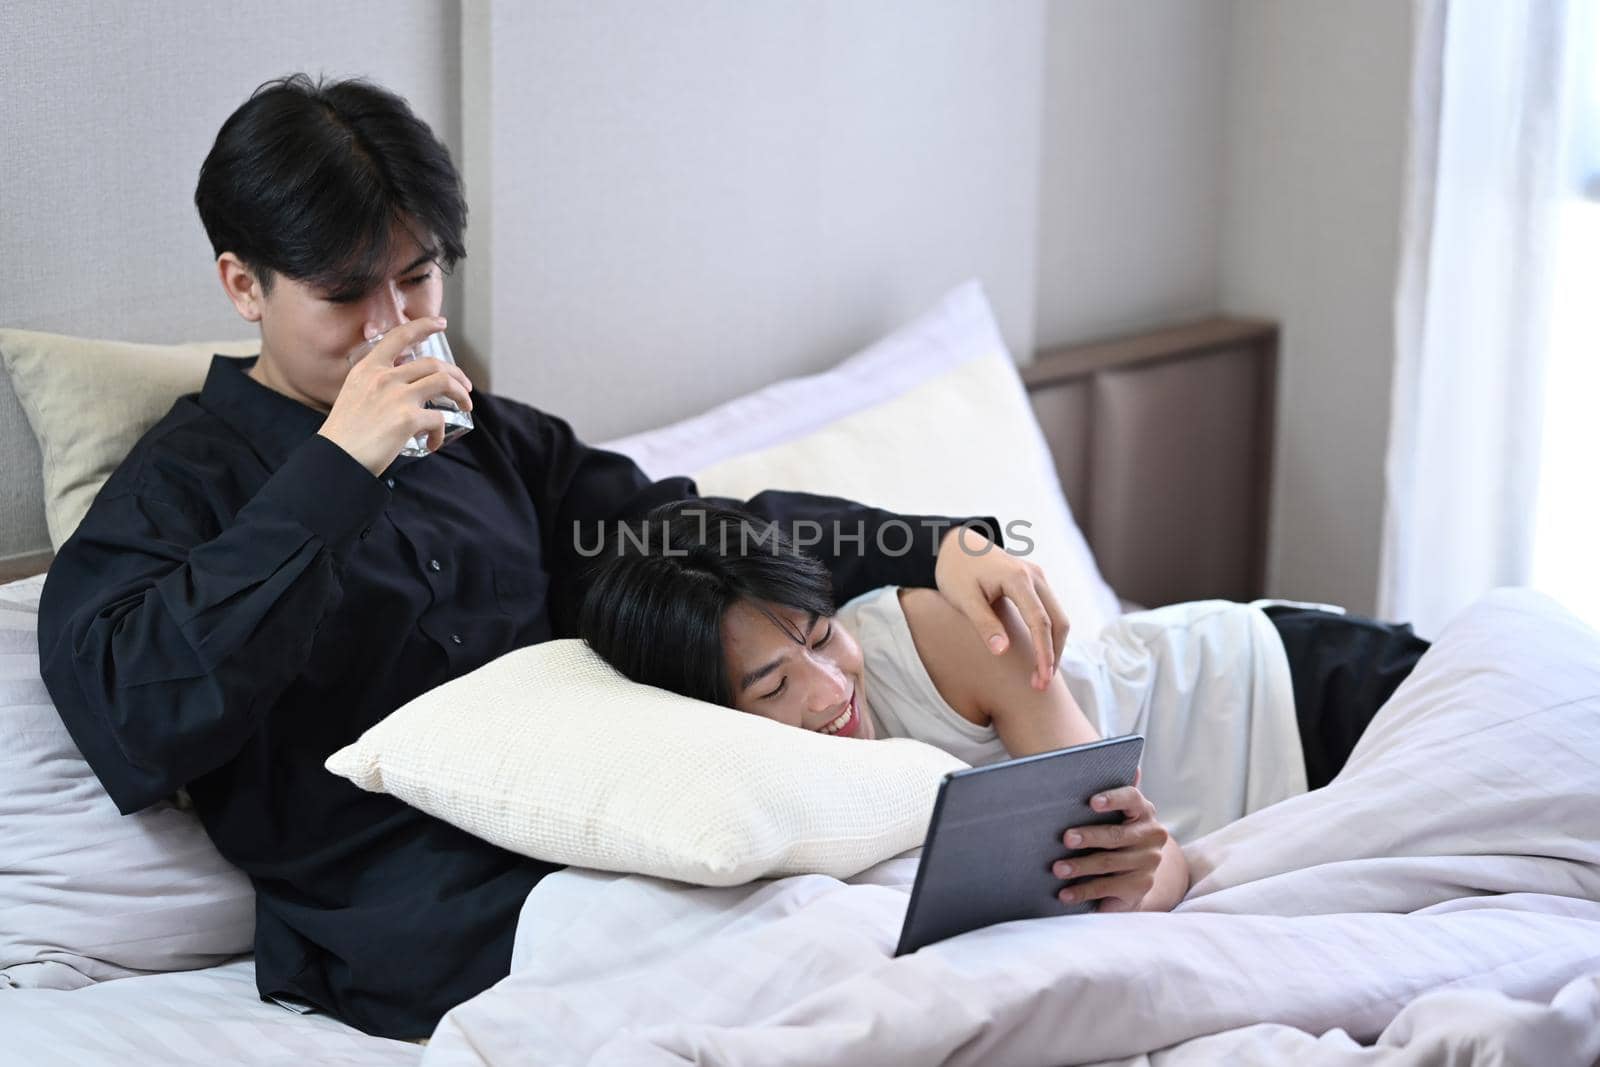 Loving homosexual couple embracing using digital tablet on bed. LGBT and love concept by prathanchorruangsak